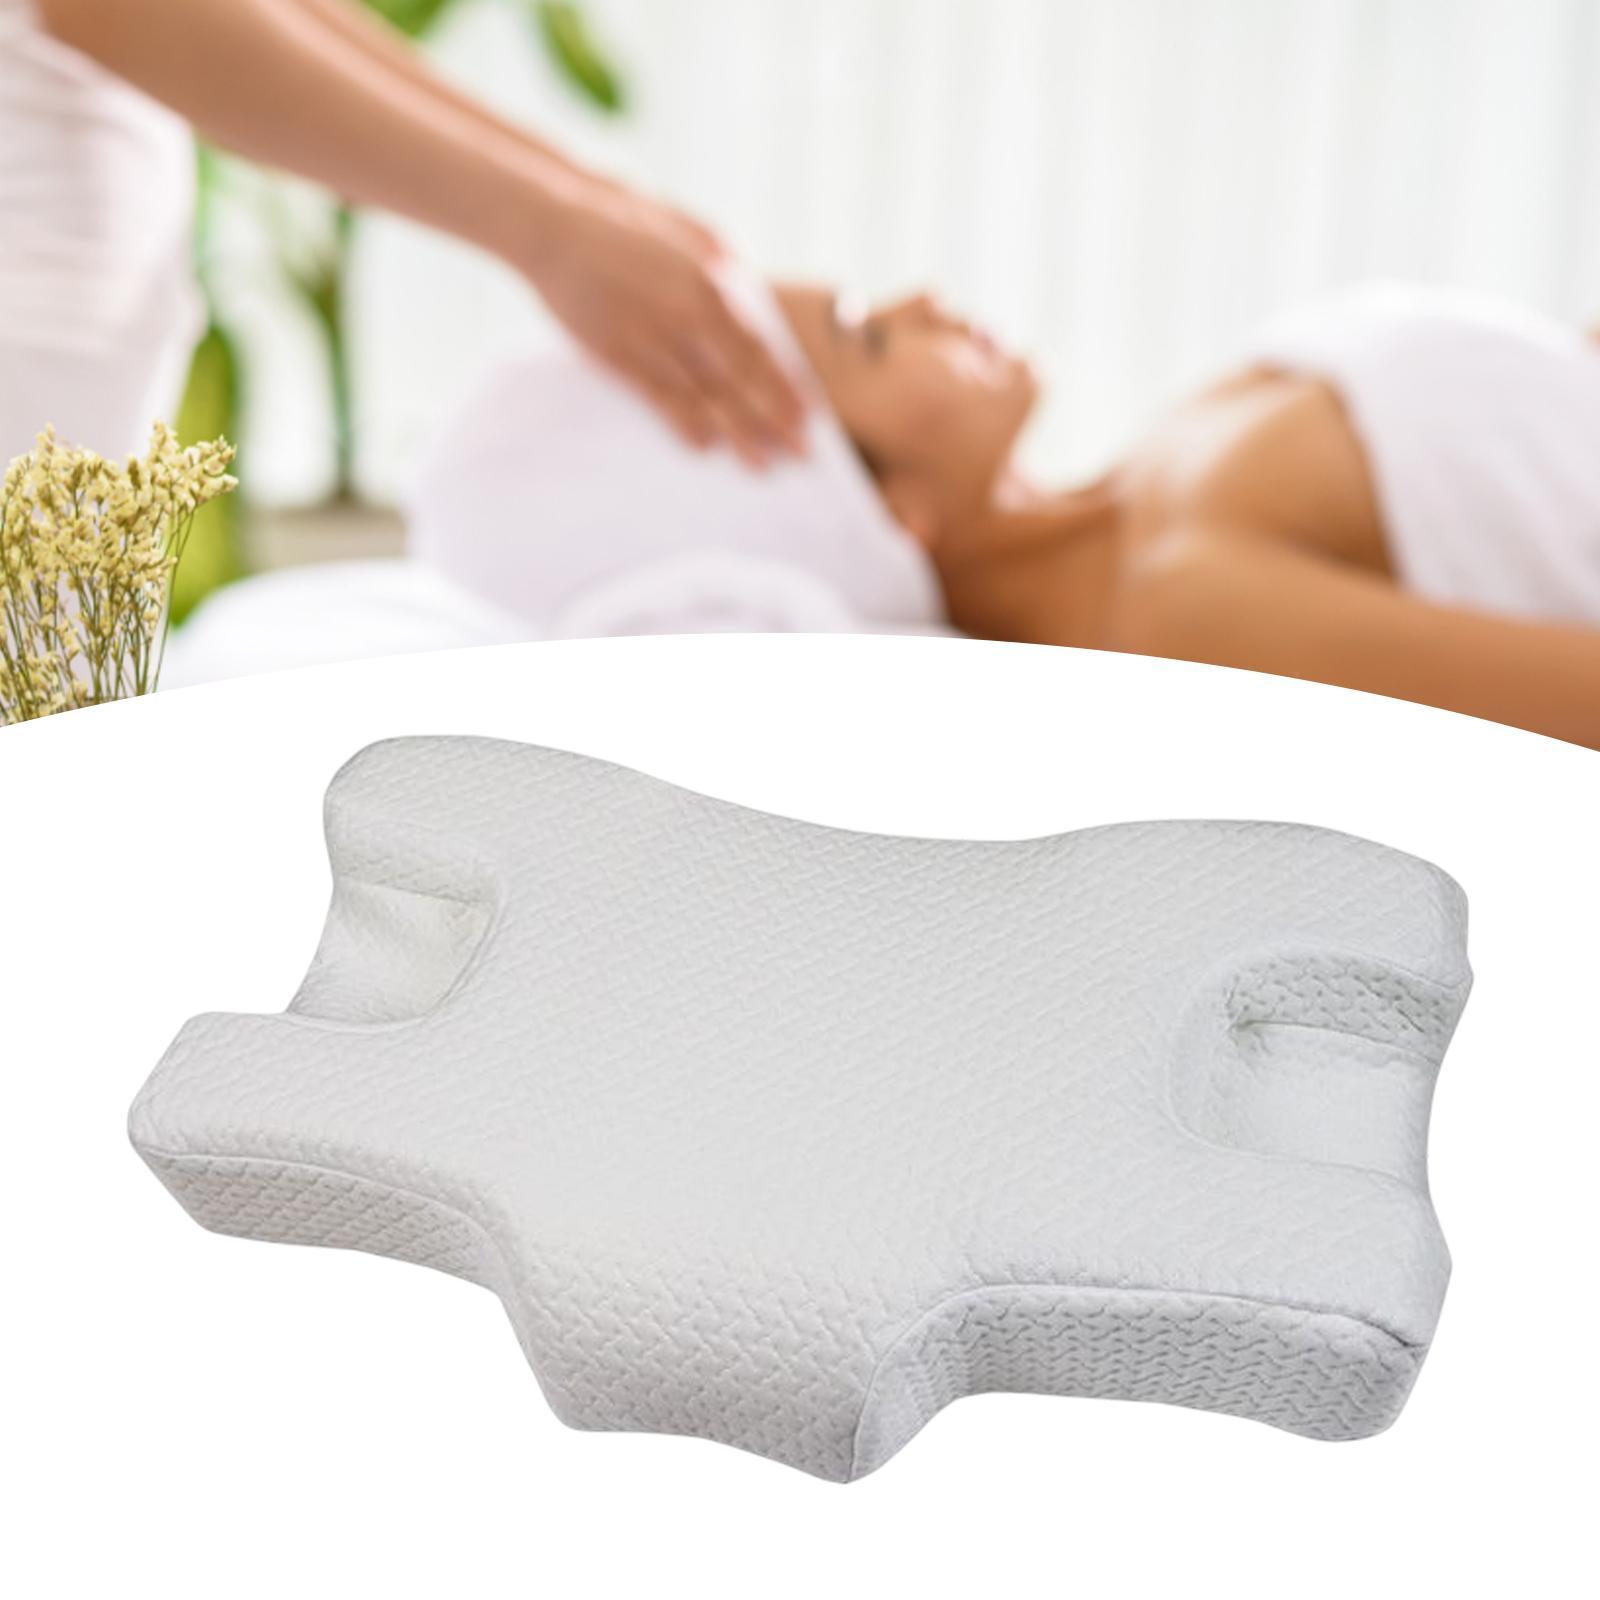 Beauty Sleep Pillow Breathable Keep Head Straight for Bedroom Mom Gifts